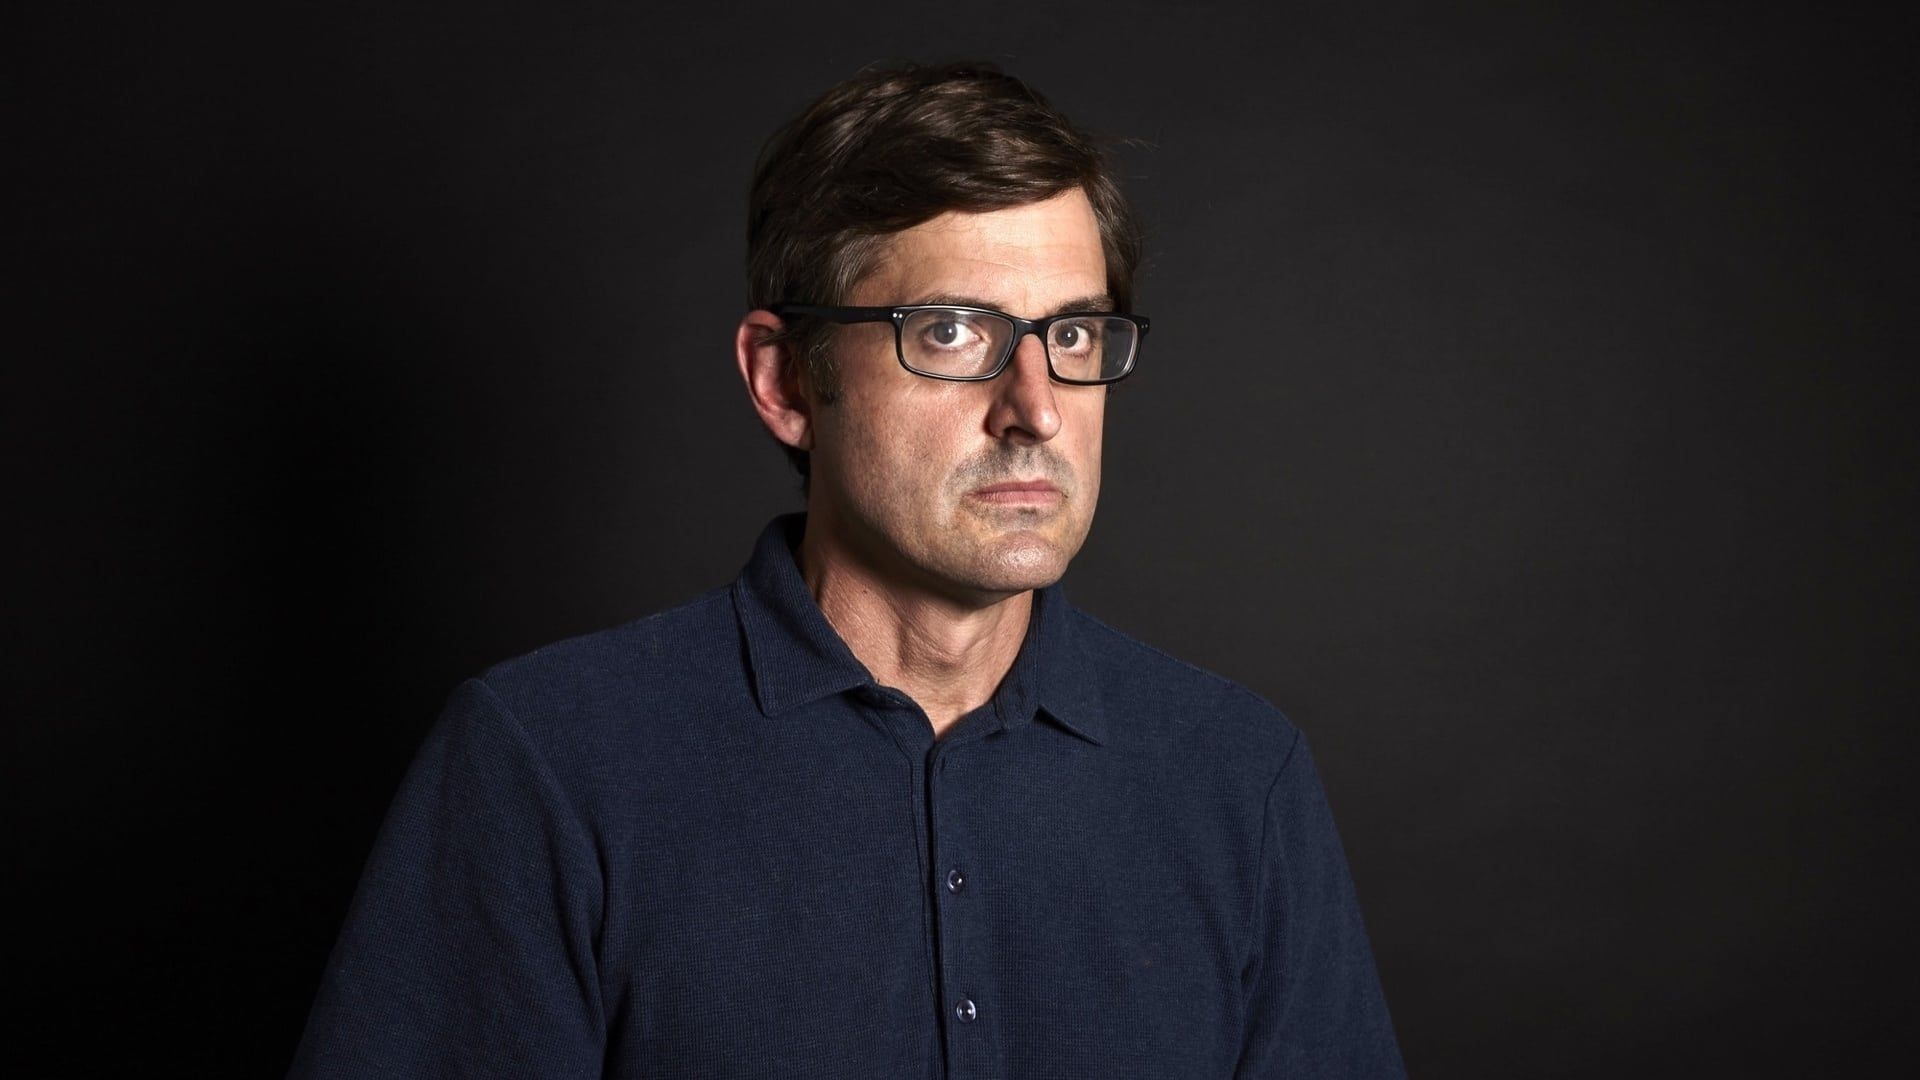 Louis Theroux: America's Medicated Kids background